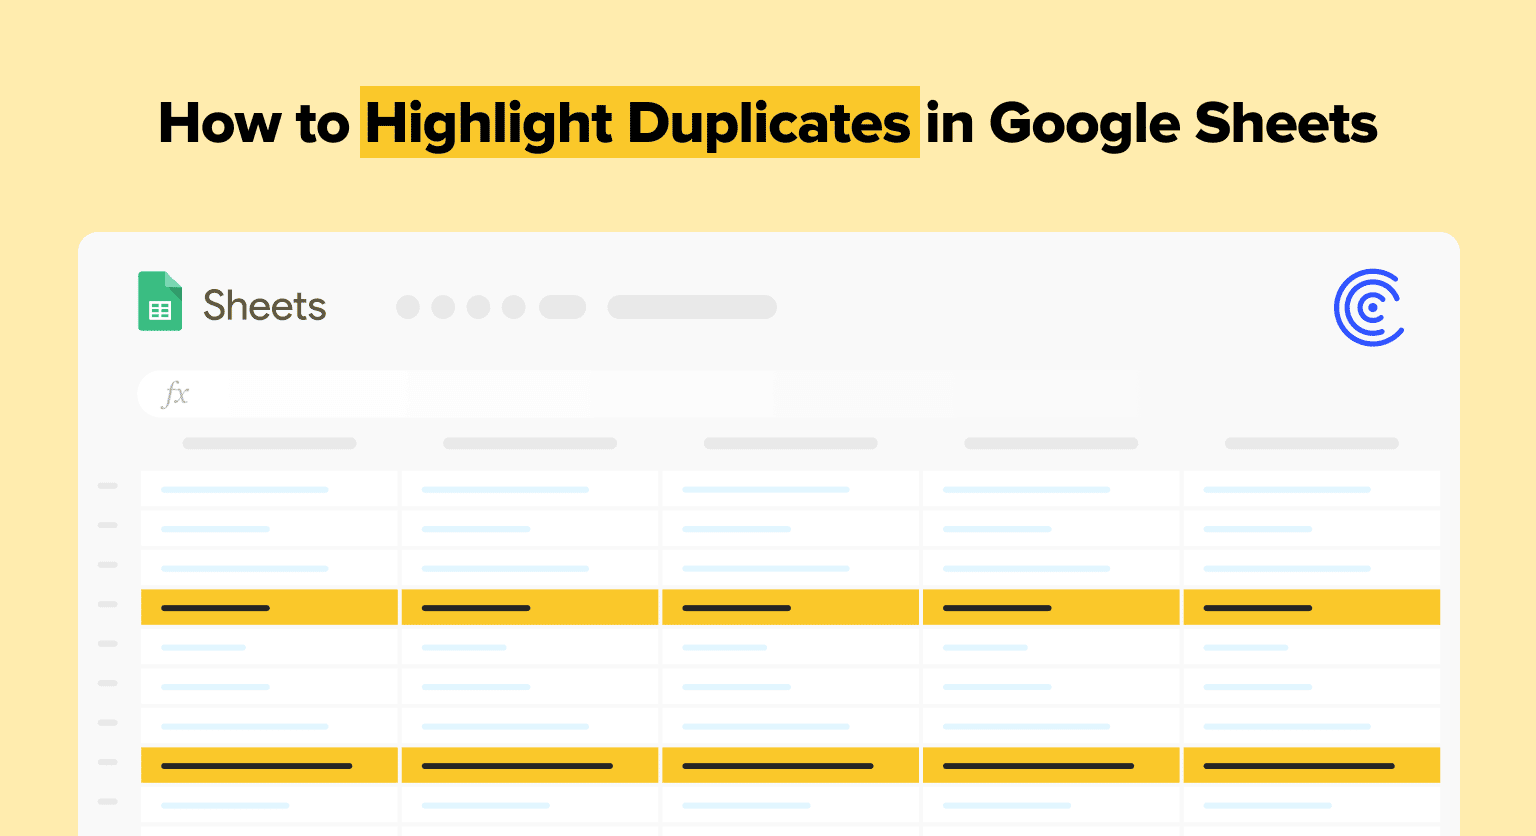 how-to-rank-duplicate-without-skipping-numbers-in-excel